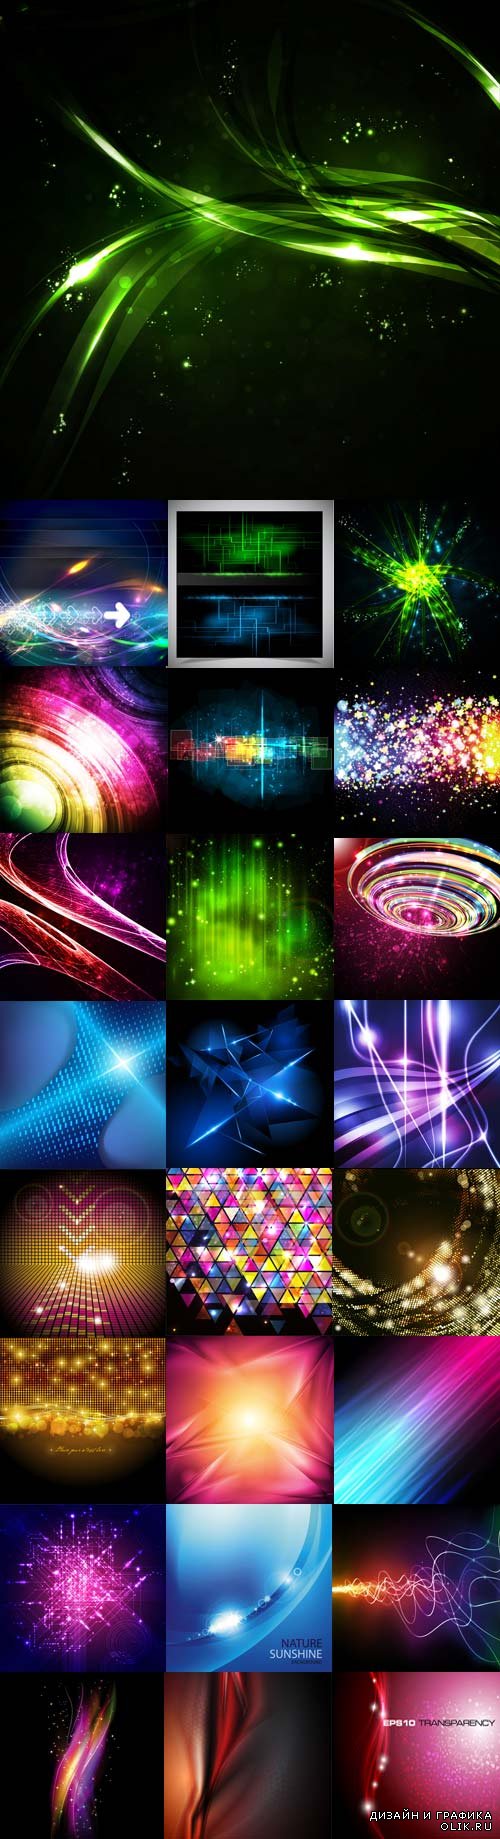 Bright colorful abstract backgrounds vector  - 2